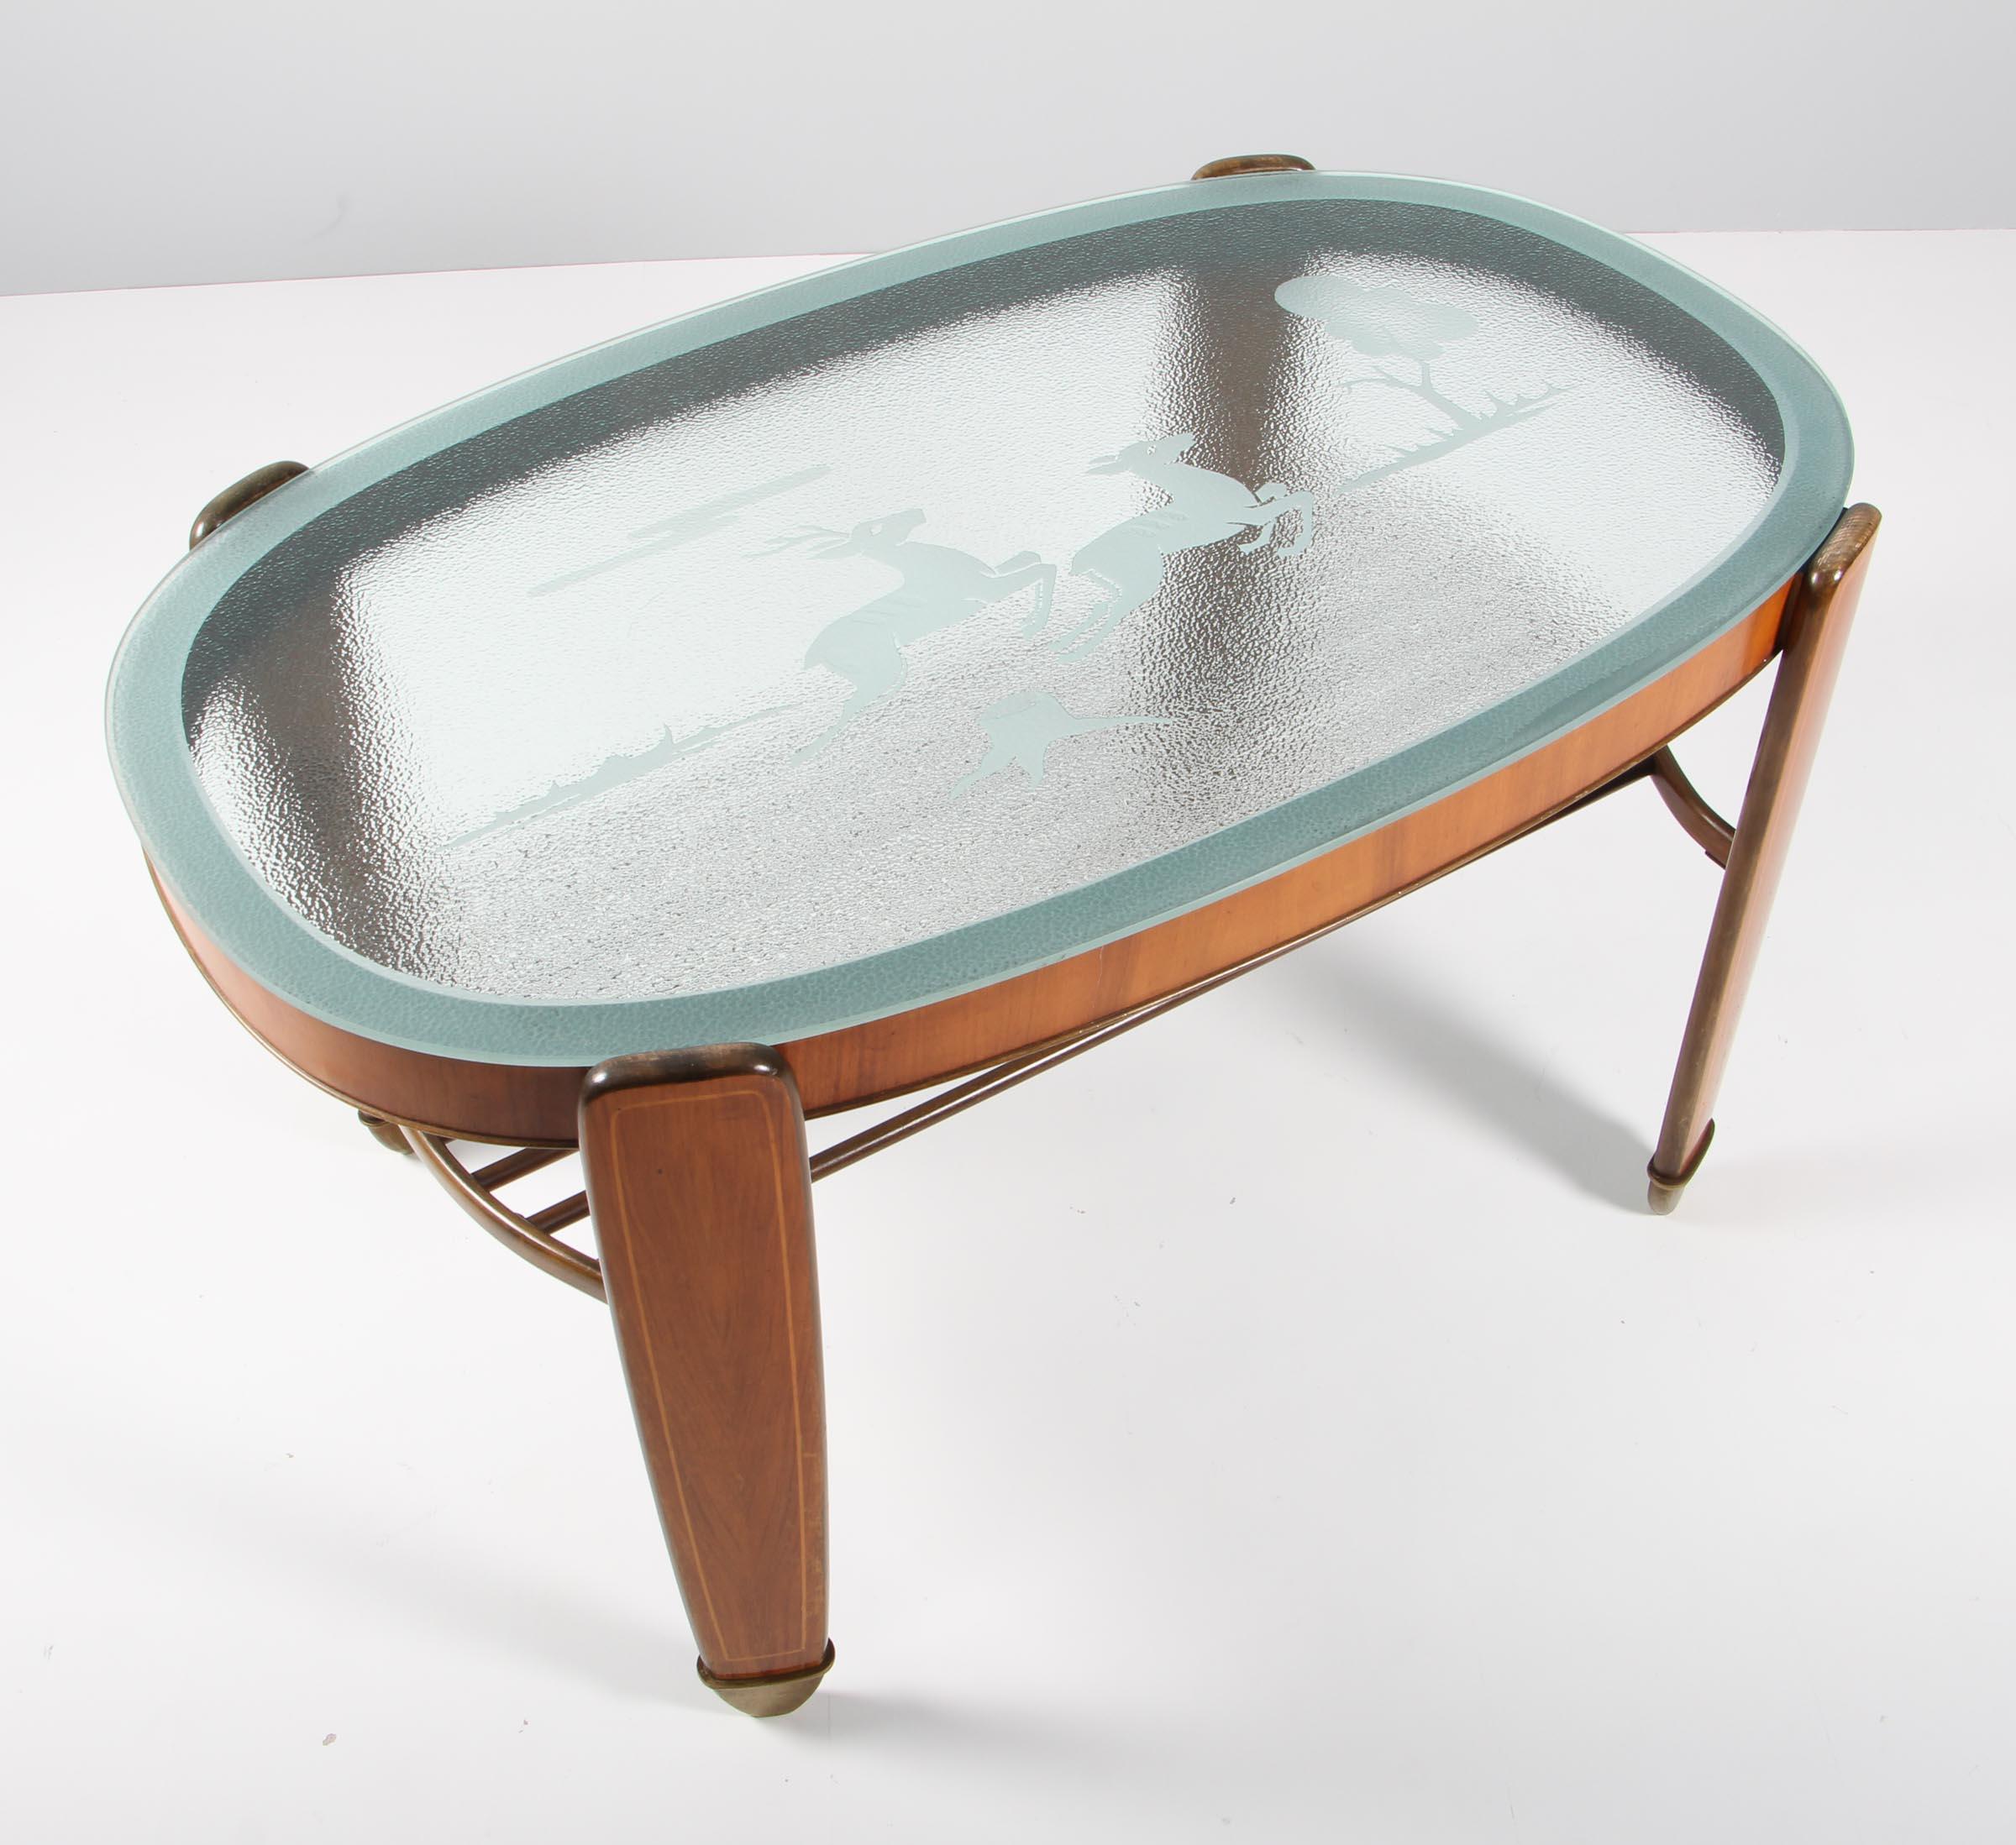 Danish cabinetmaker Art Deco coffee table with nutwood frame with intarsia details. Shoes of brass.

Glass plate with details of a person and a horse.

Made in the 1930s.